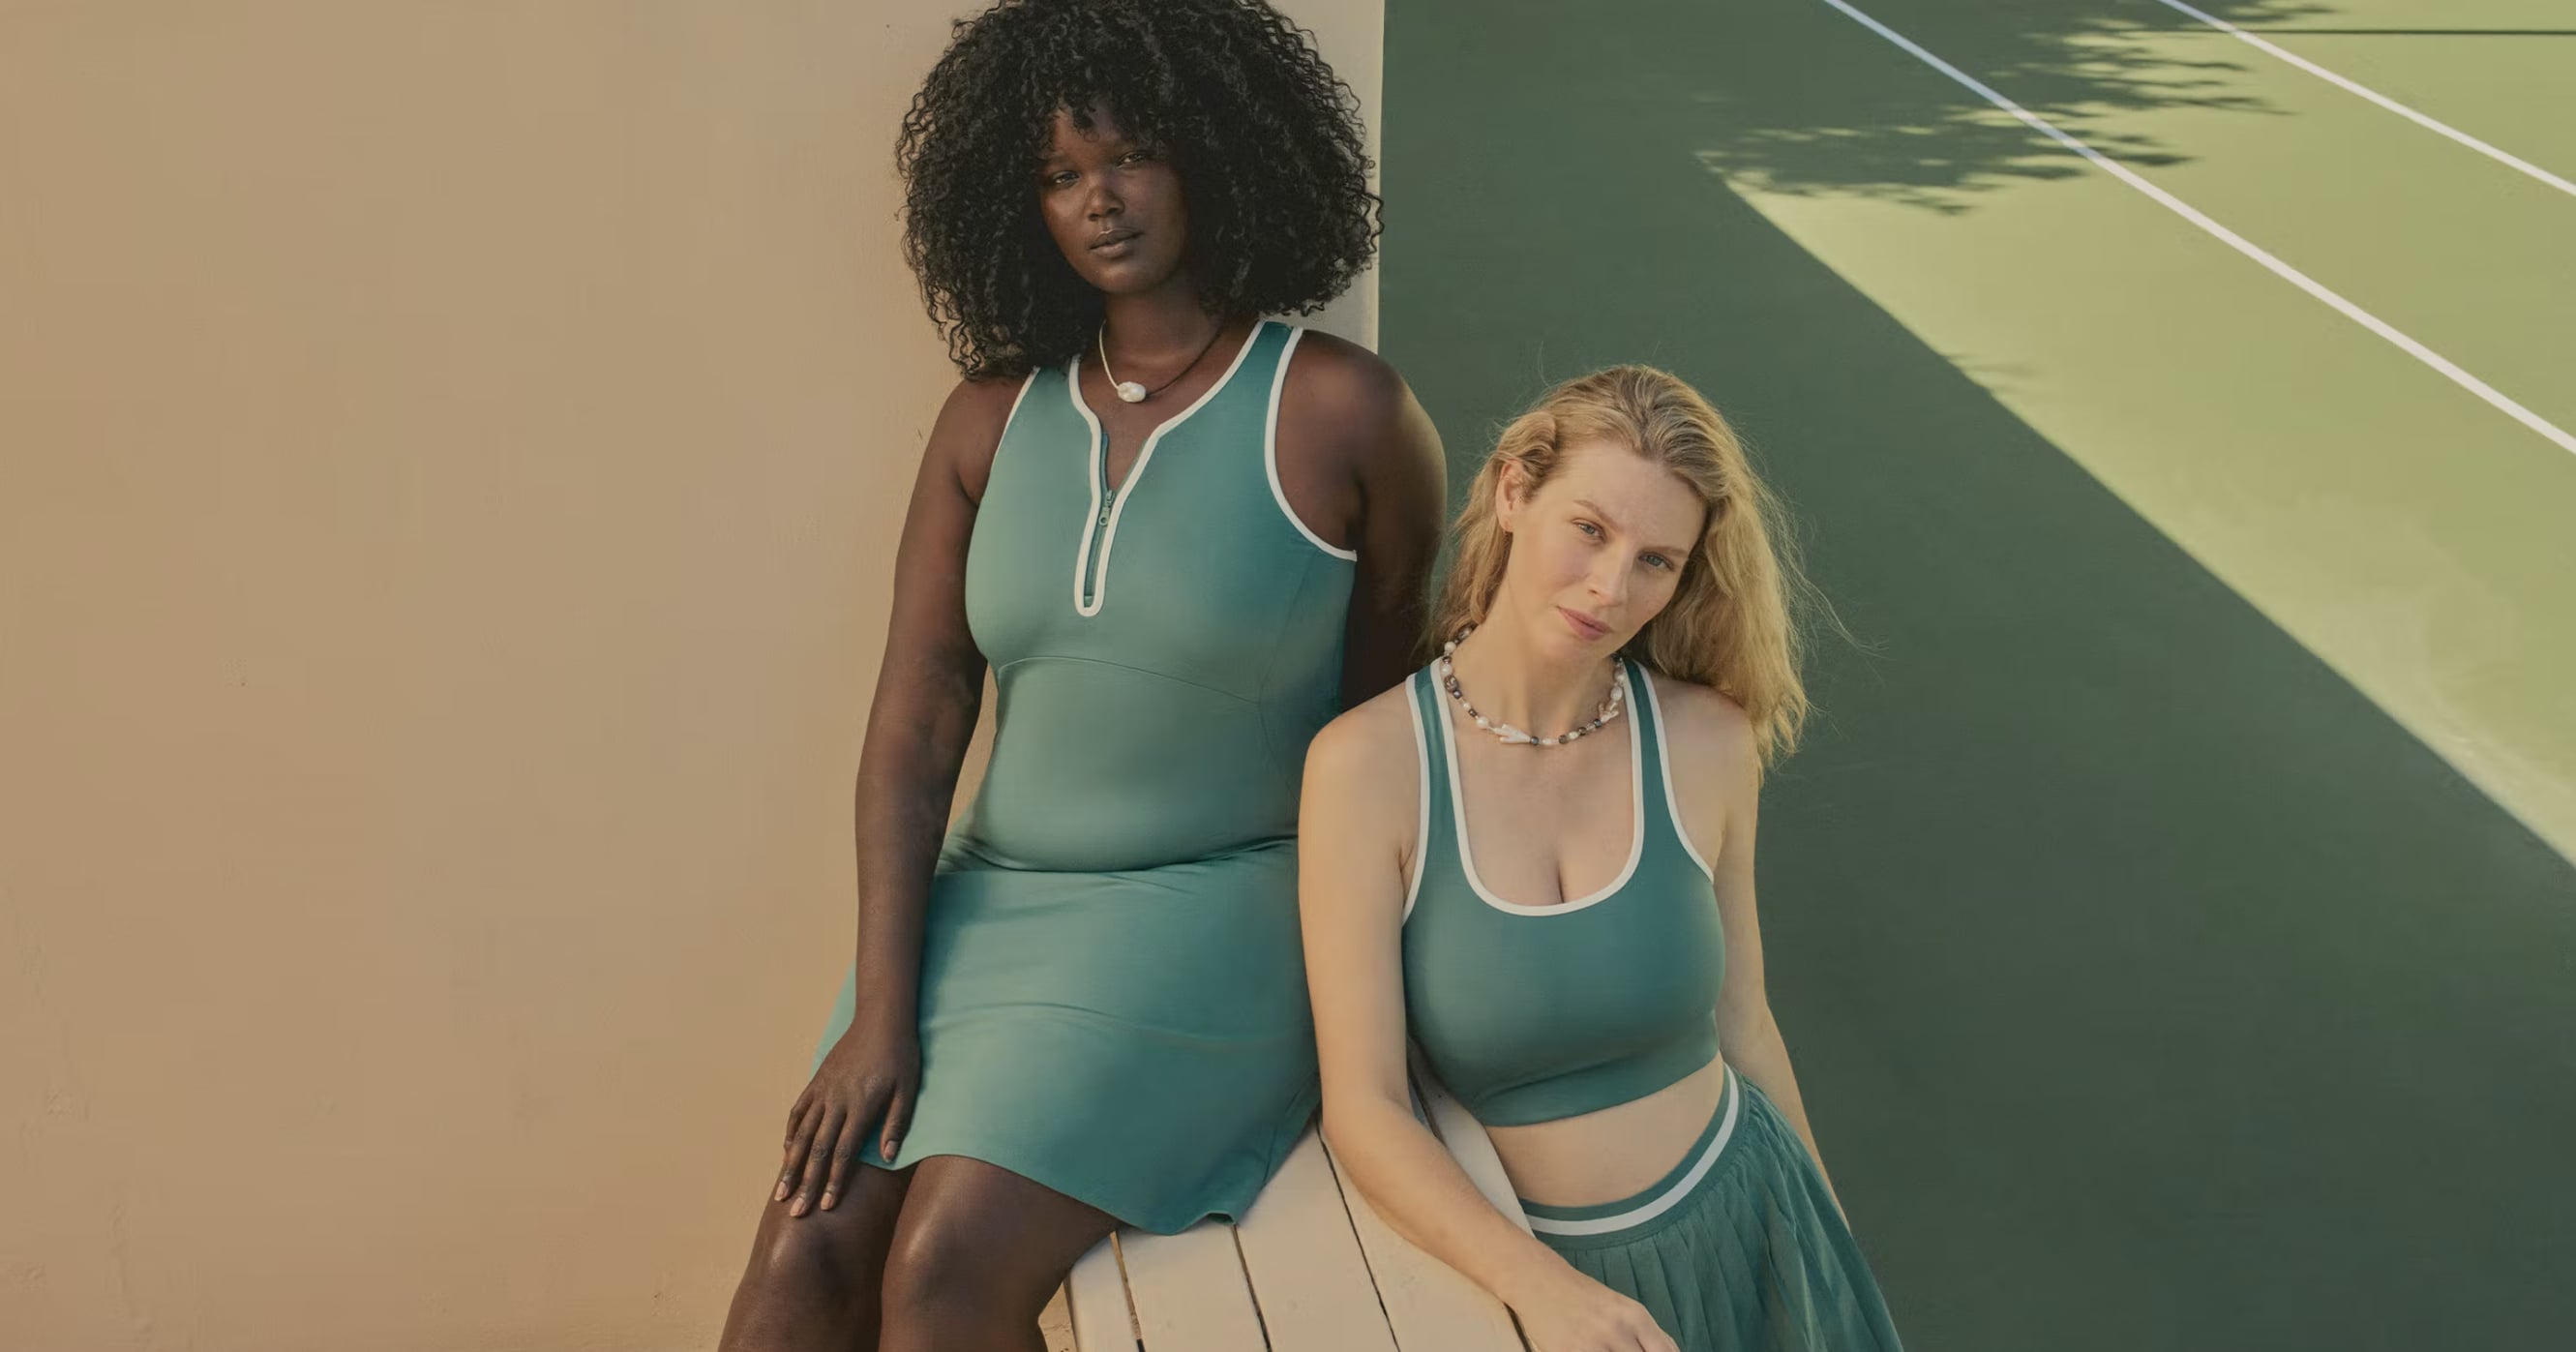 Girlfriend Collective: The ethical sportswear brand that TikTok is